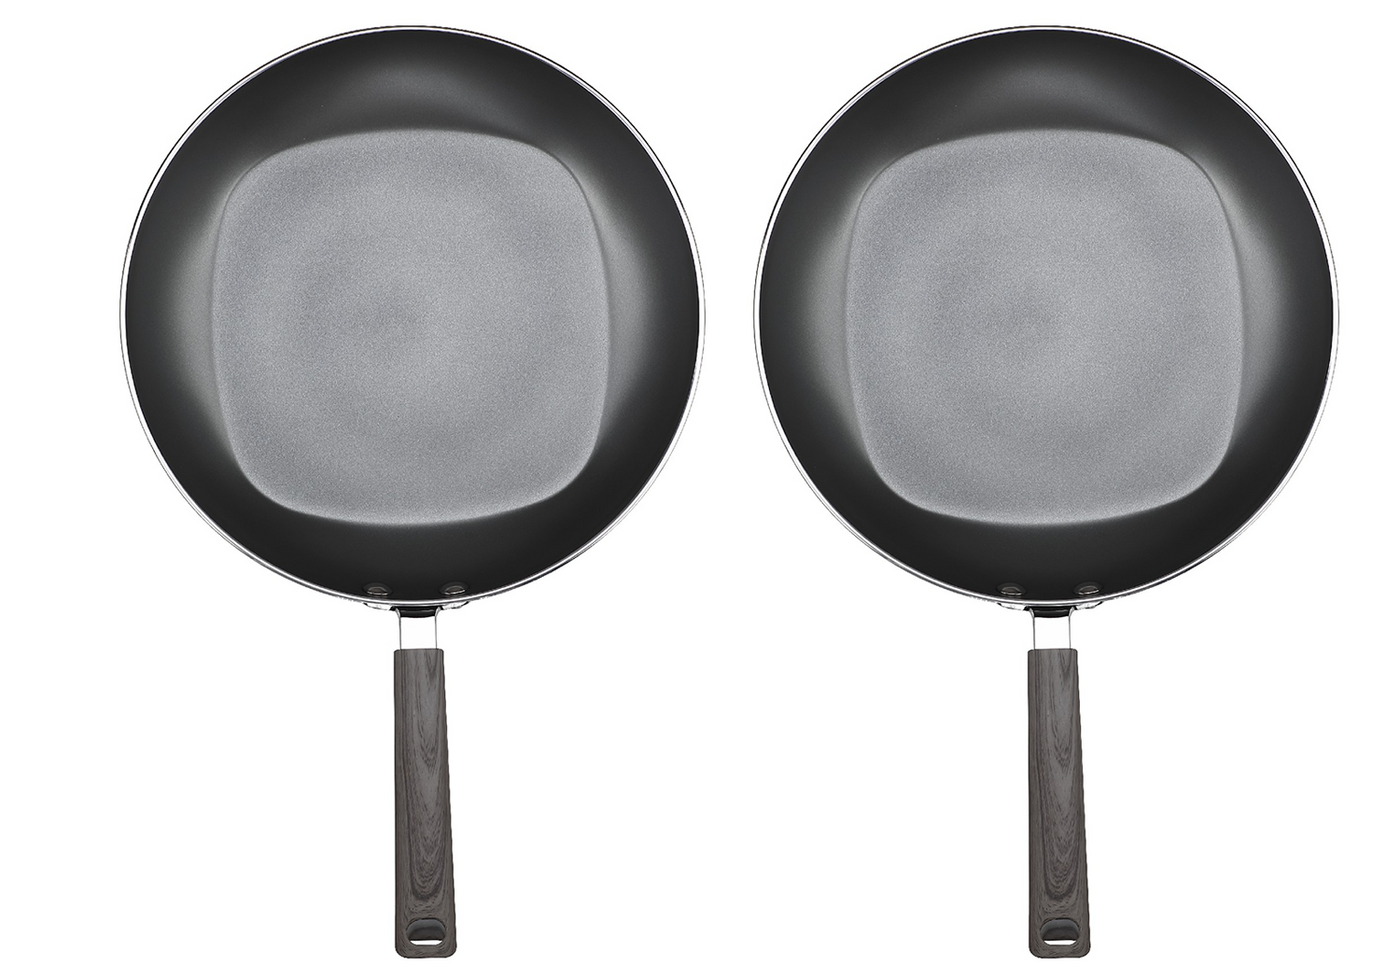 11 Inch Classic Non-stick Fry Pan (2 PACK) – Not a Square Pan